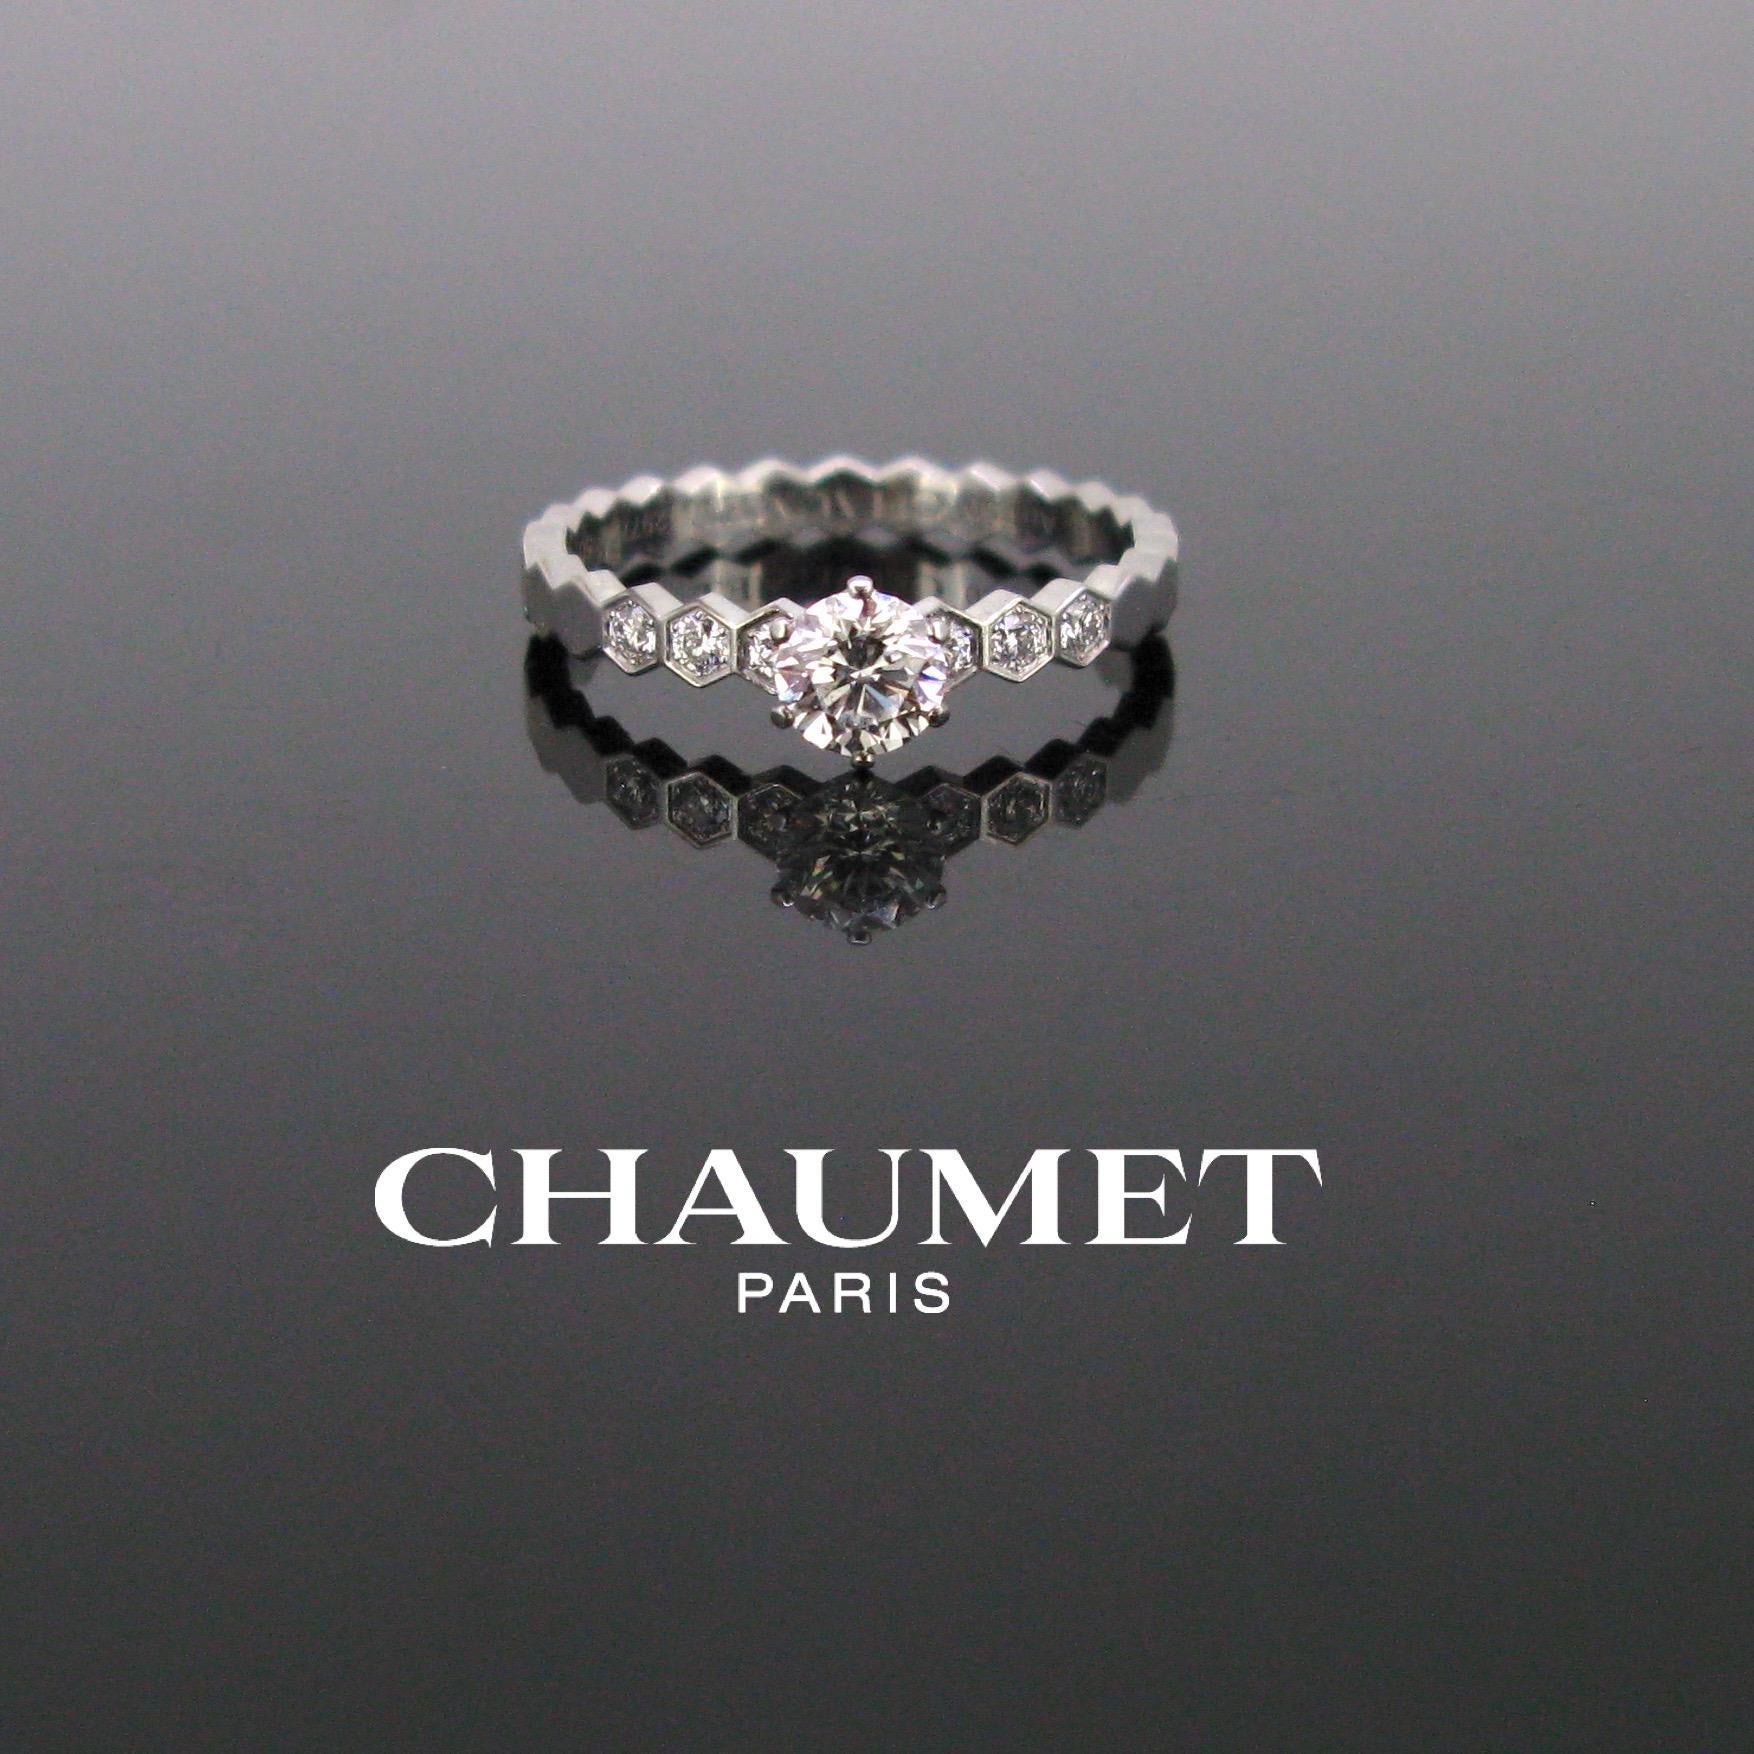 Weight:	2.12gr

Metal:		18kt white gold

Stones:	1 Diamonds
•	Cut:	Brilliant
•	Carat weight:	0.30ct approximately
•	Colour:	G
•	Clarity:	VS

Others: 	6 Diamonds
•	Total carat weight: 	0.15ct approximately

Condition:	Excellent

Hallmarks:	French –